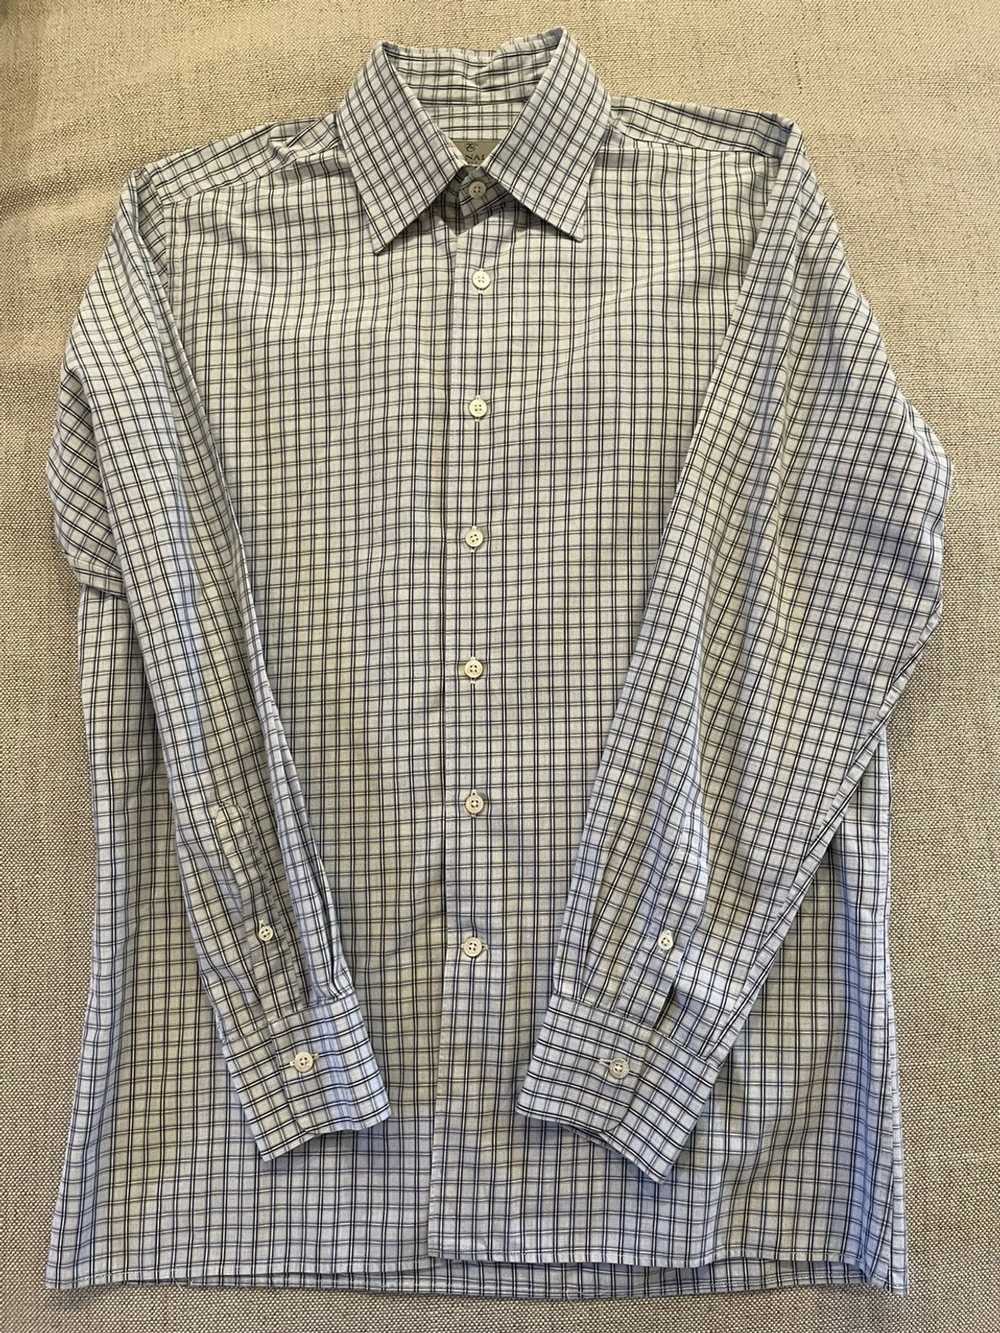 Canali Double Grid Check Shirt - image 4